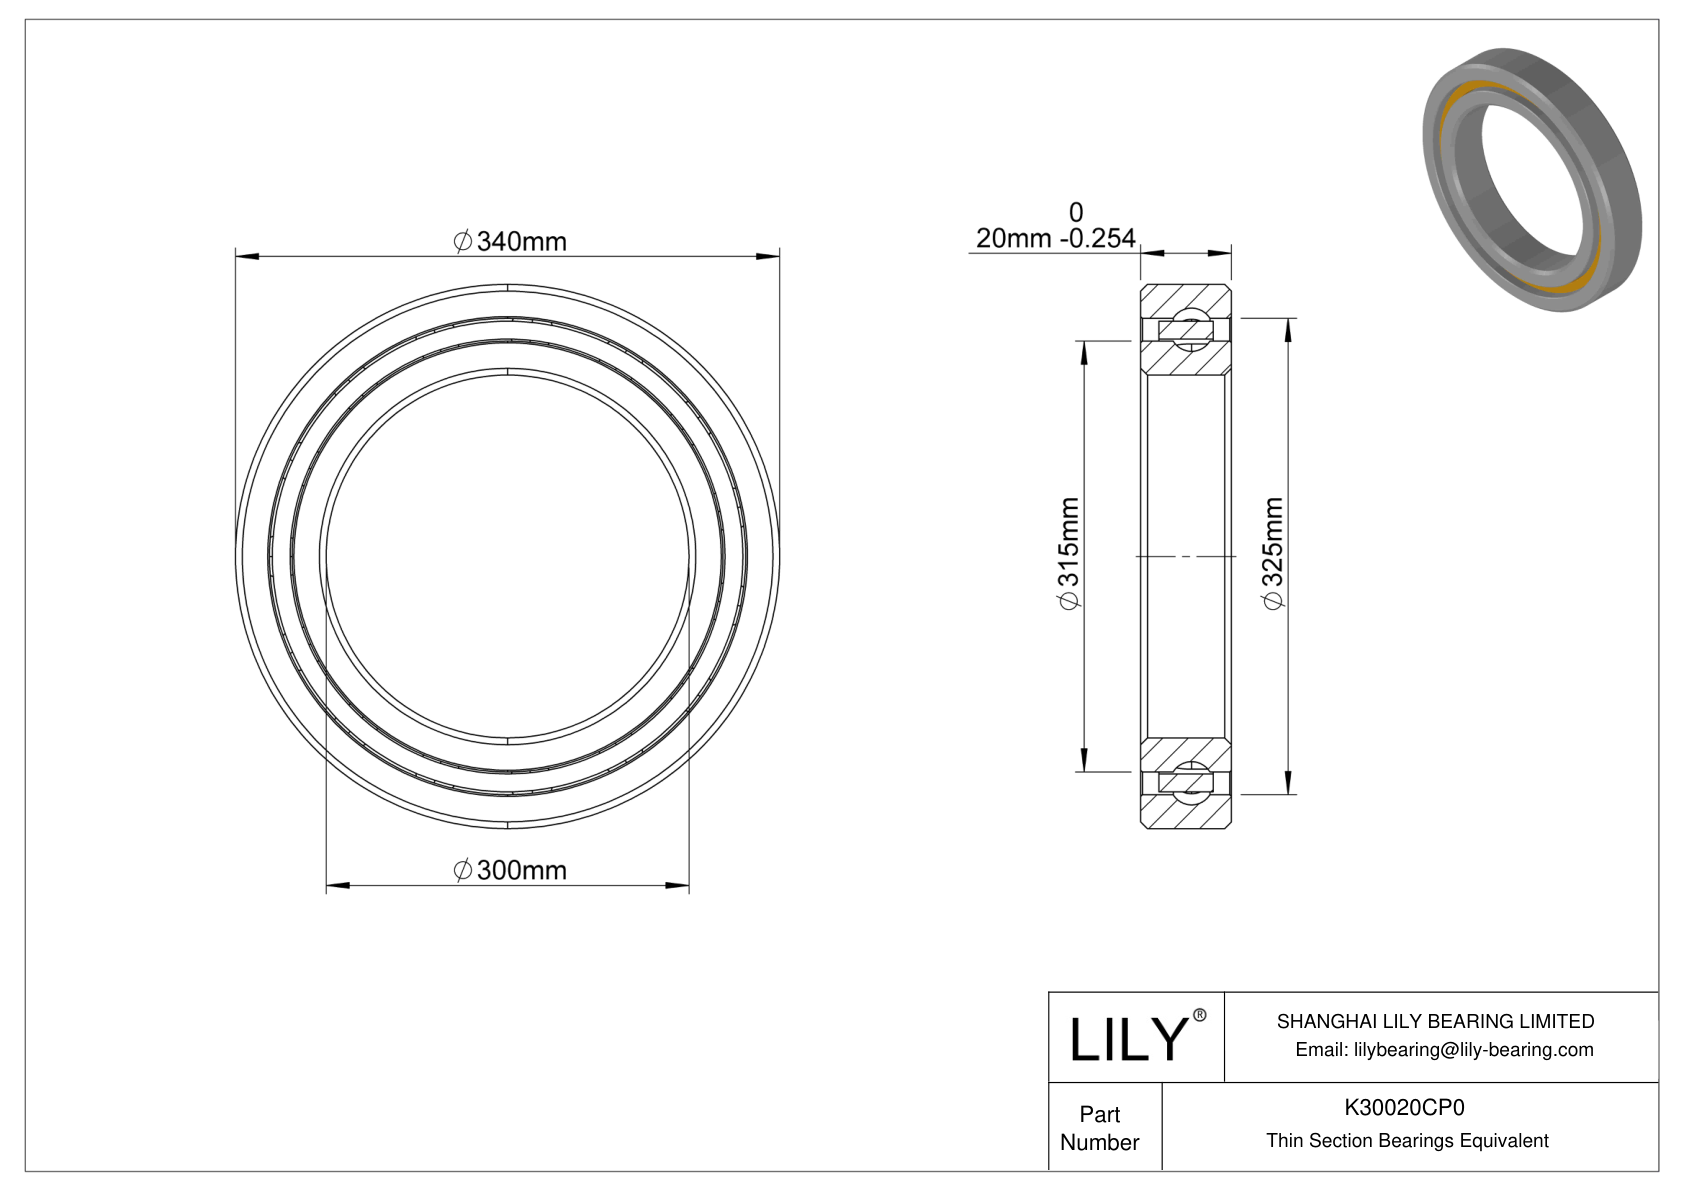 K30020CP0 Constant Section (CS) Bearings cad drawing